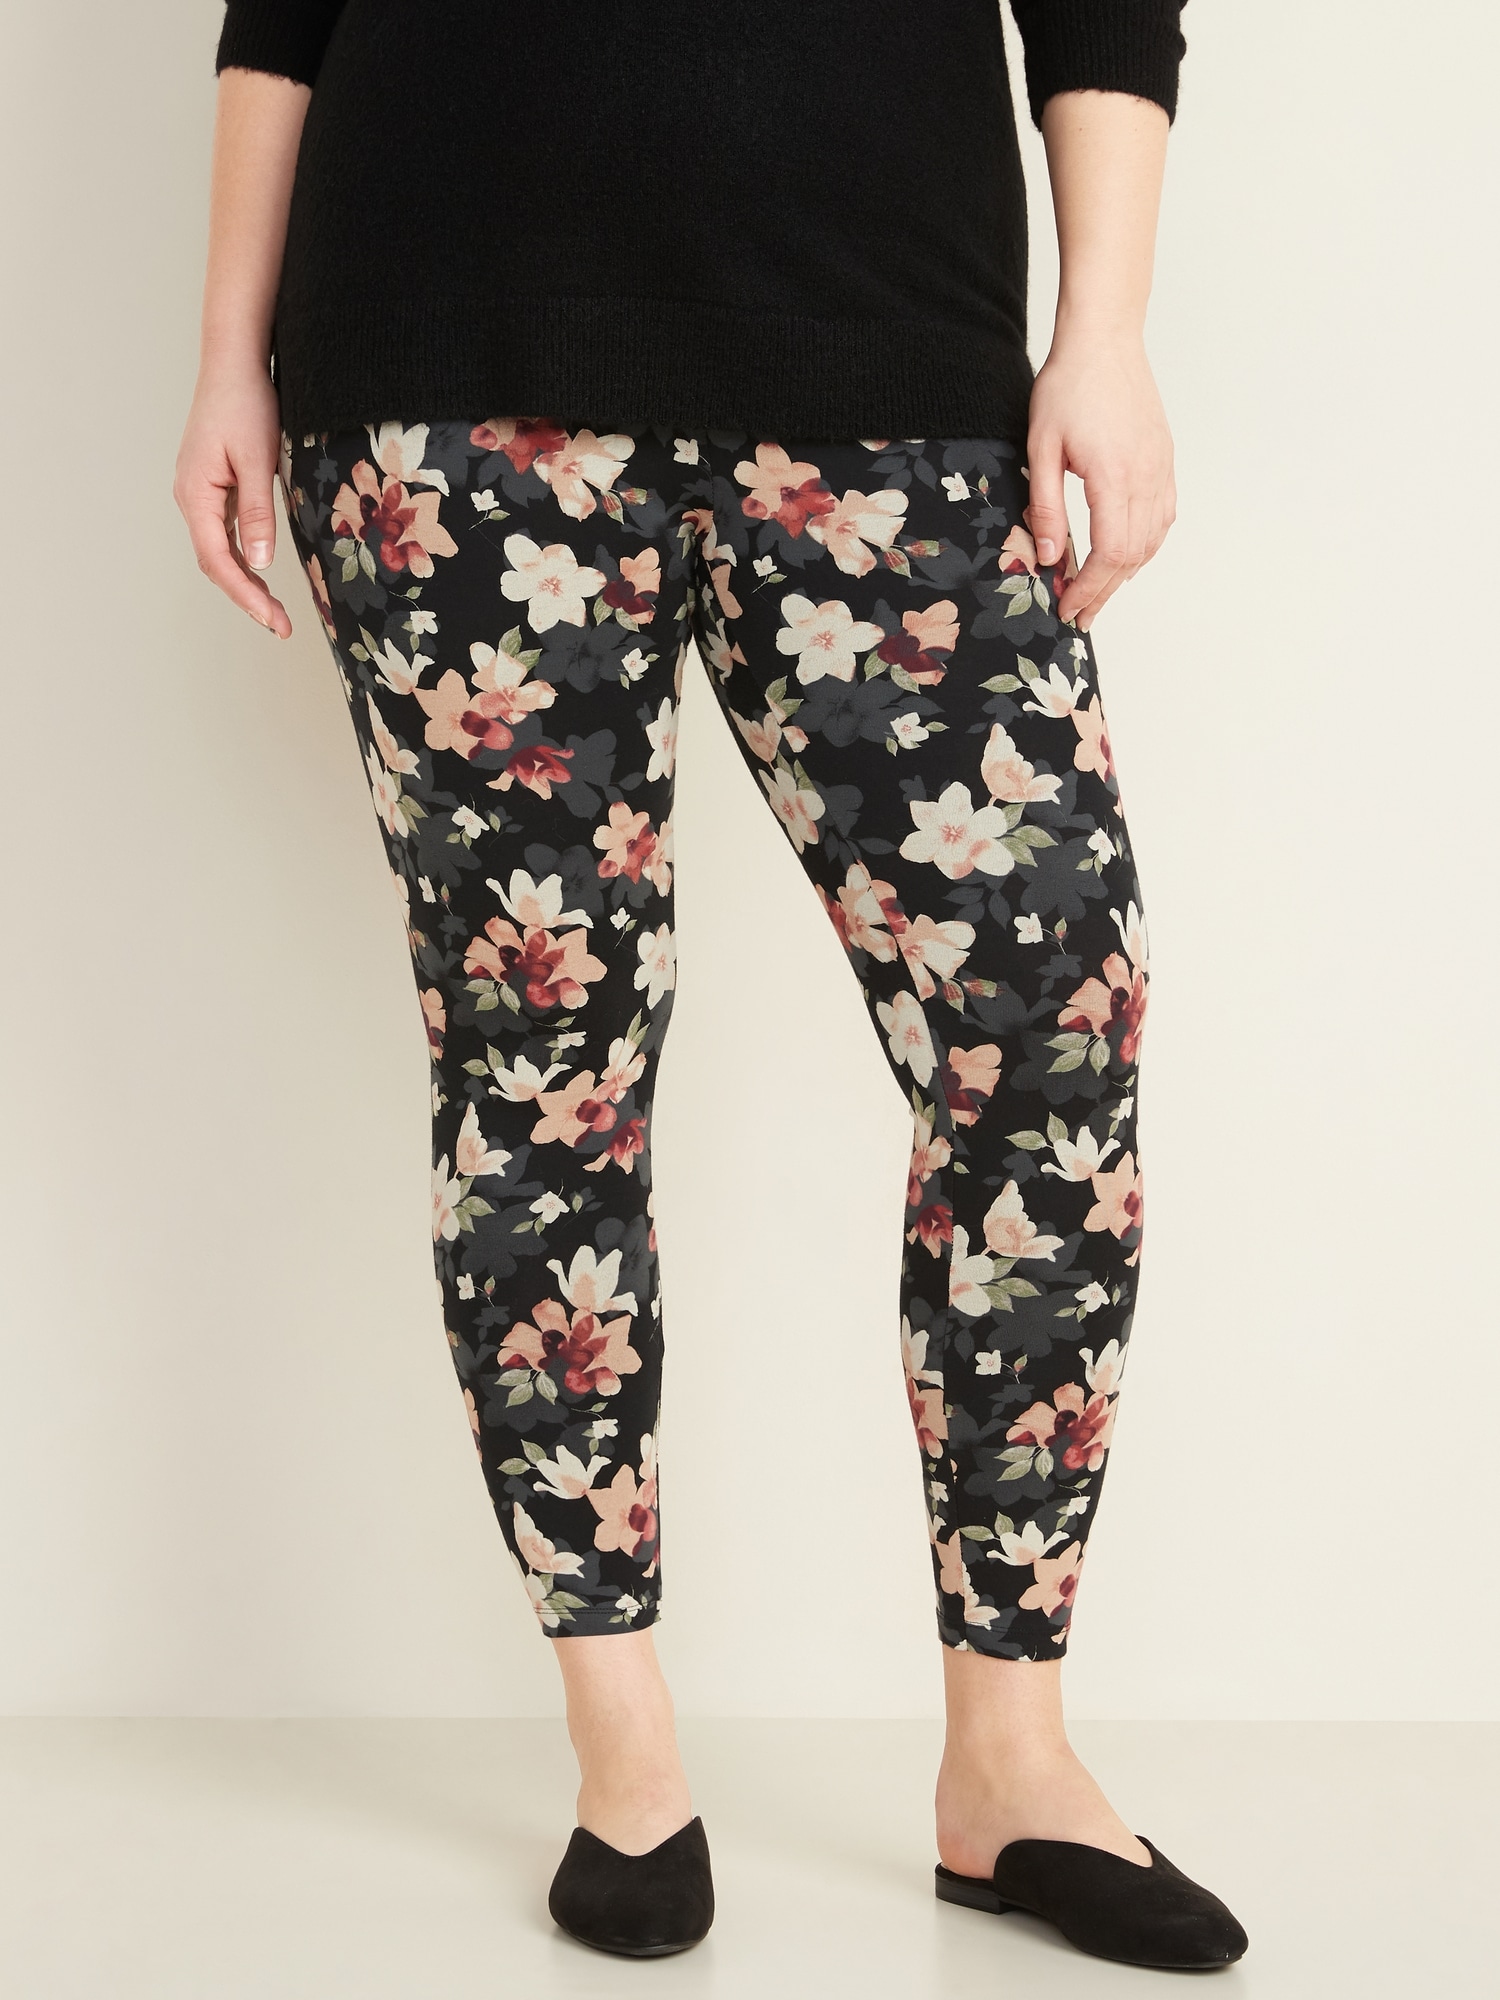 High-Waisted Plus-Size Jersey Leggings